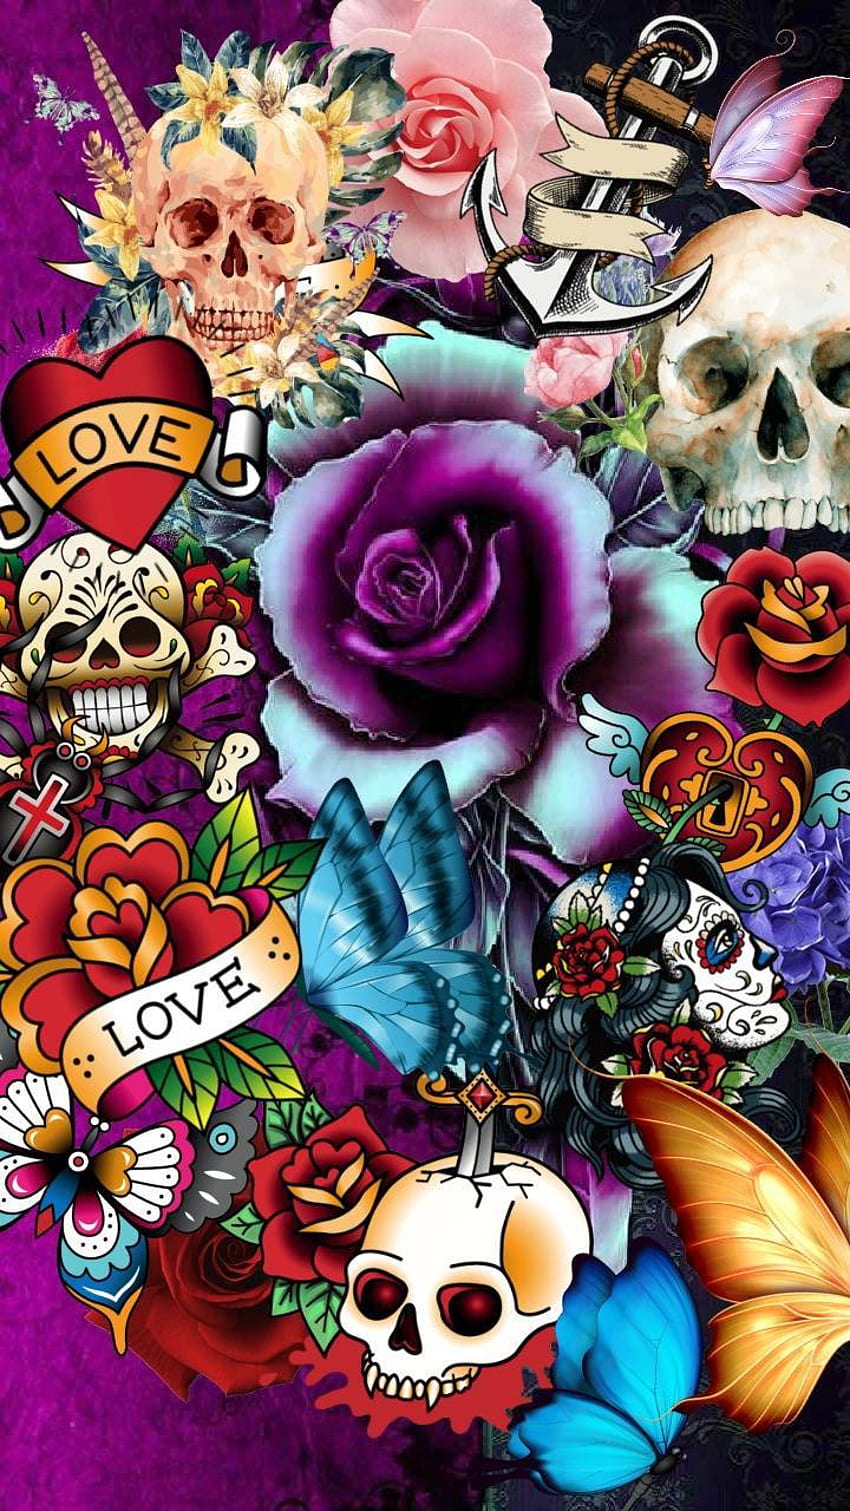 Skulls and Roses Wallpapers  Top Free Skulls and Roses Backgrounds   WallpaperAccess